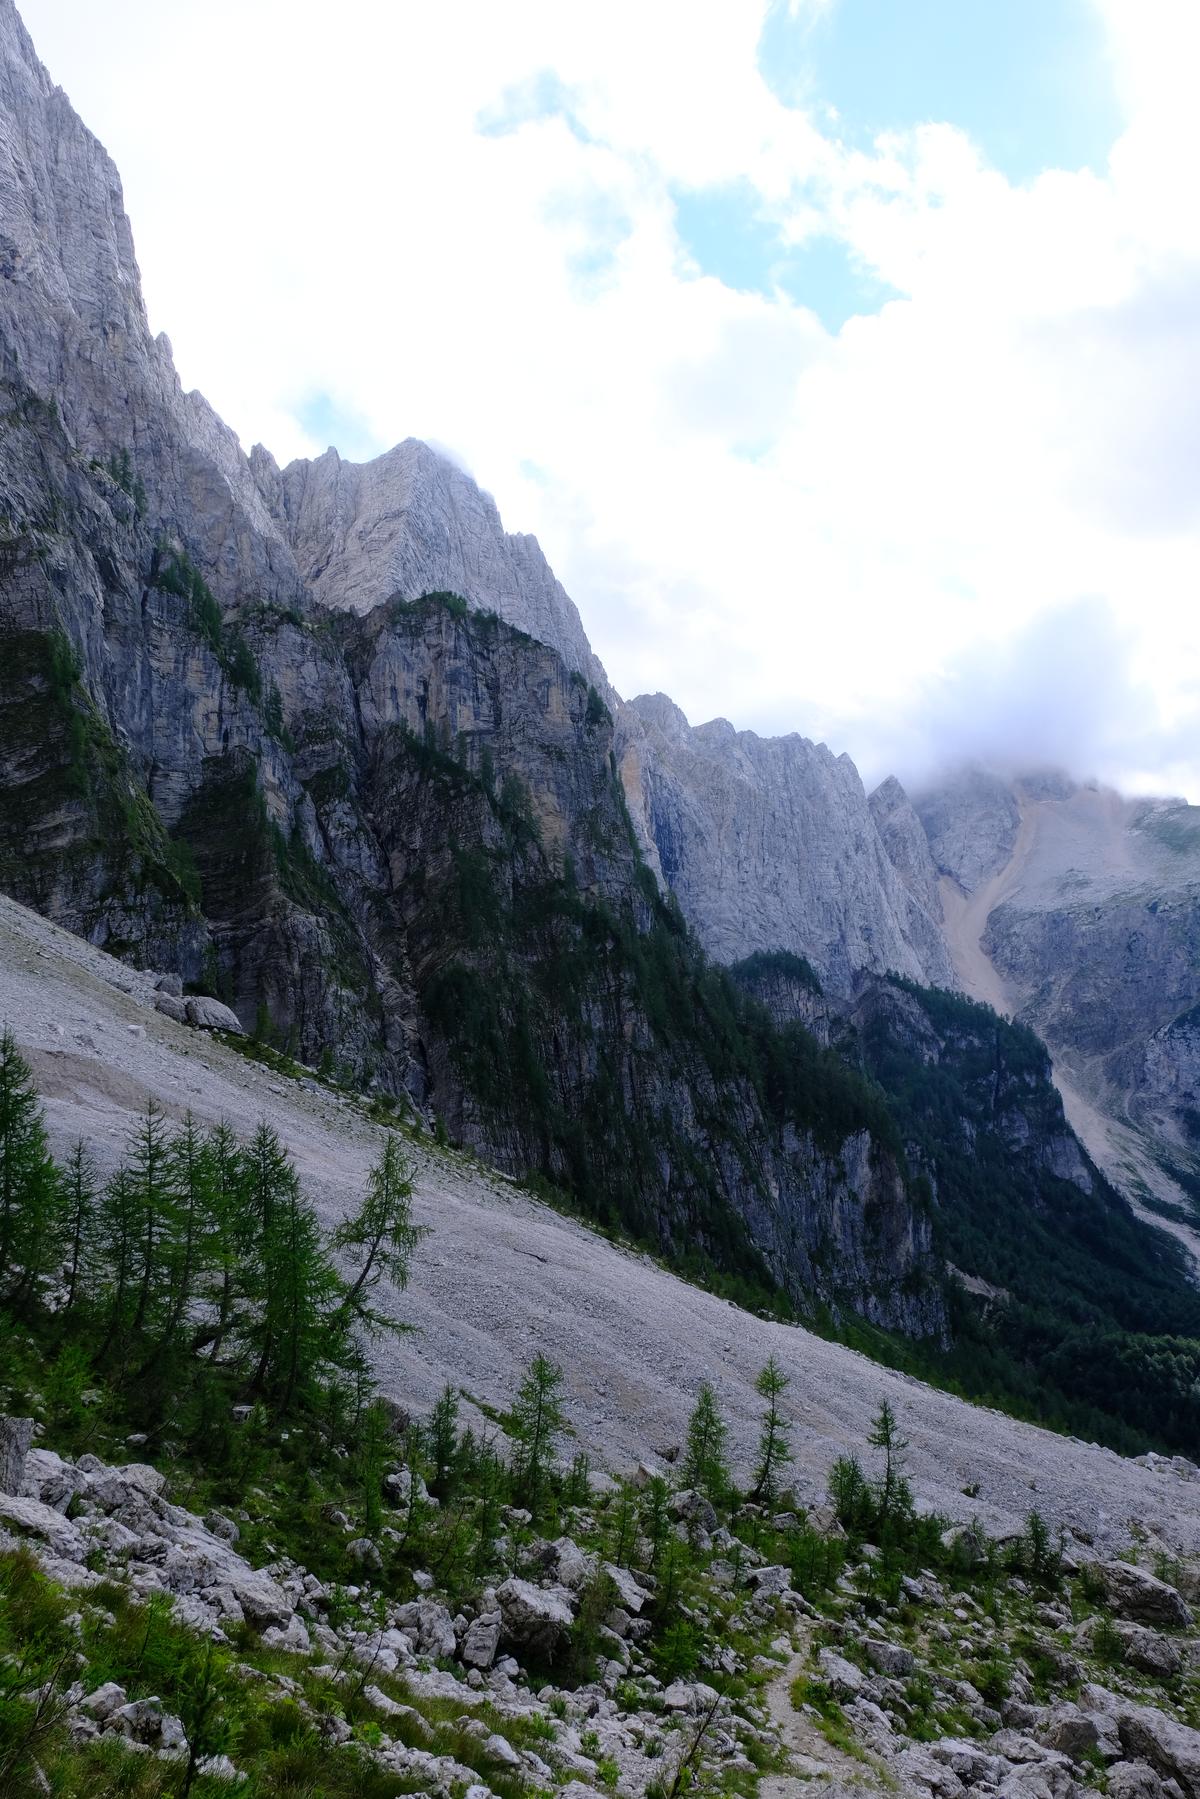 Long sloped of scree sprawl out below the peaks of the Slovenian Alps